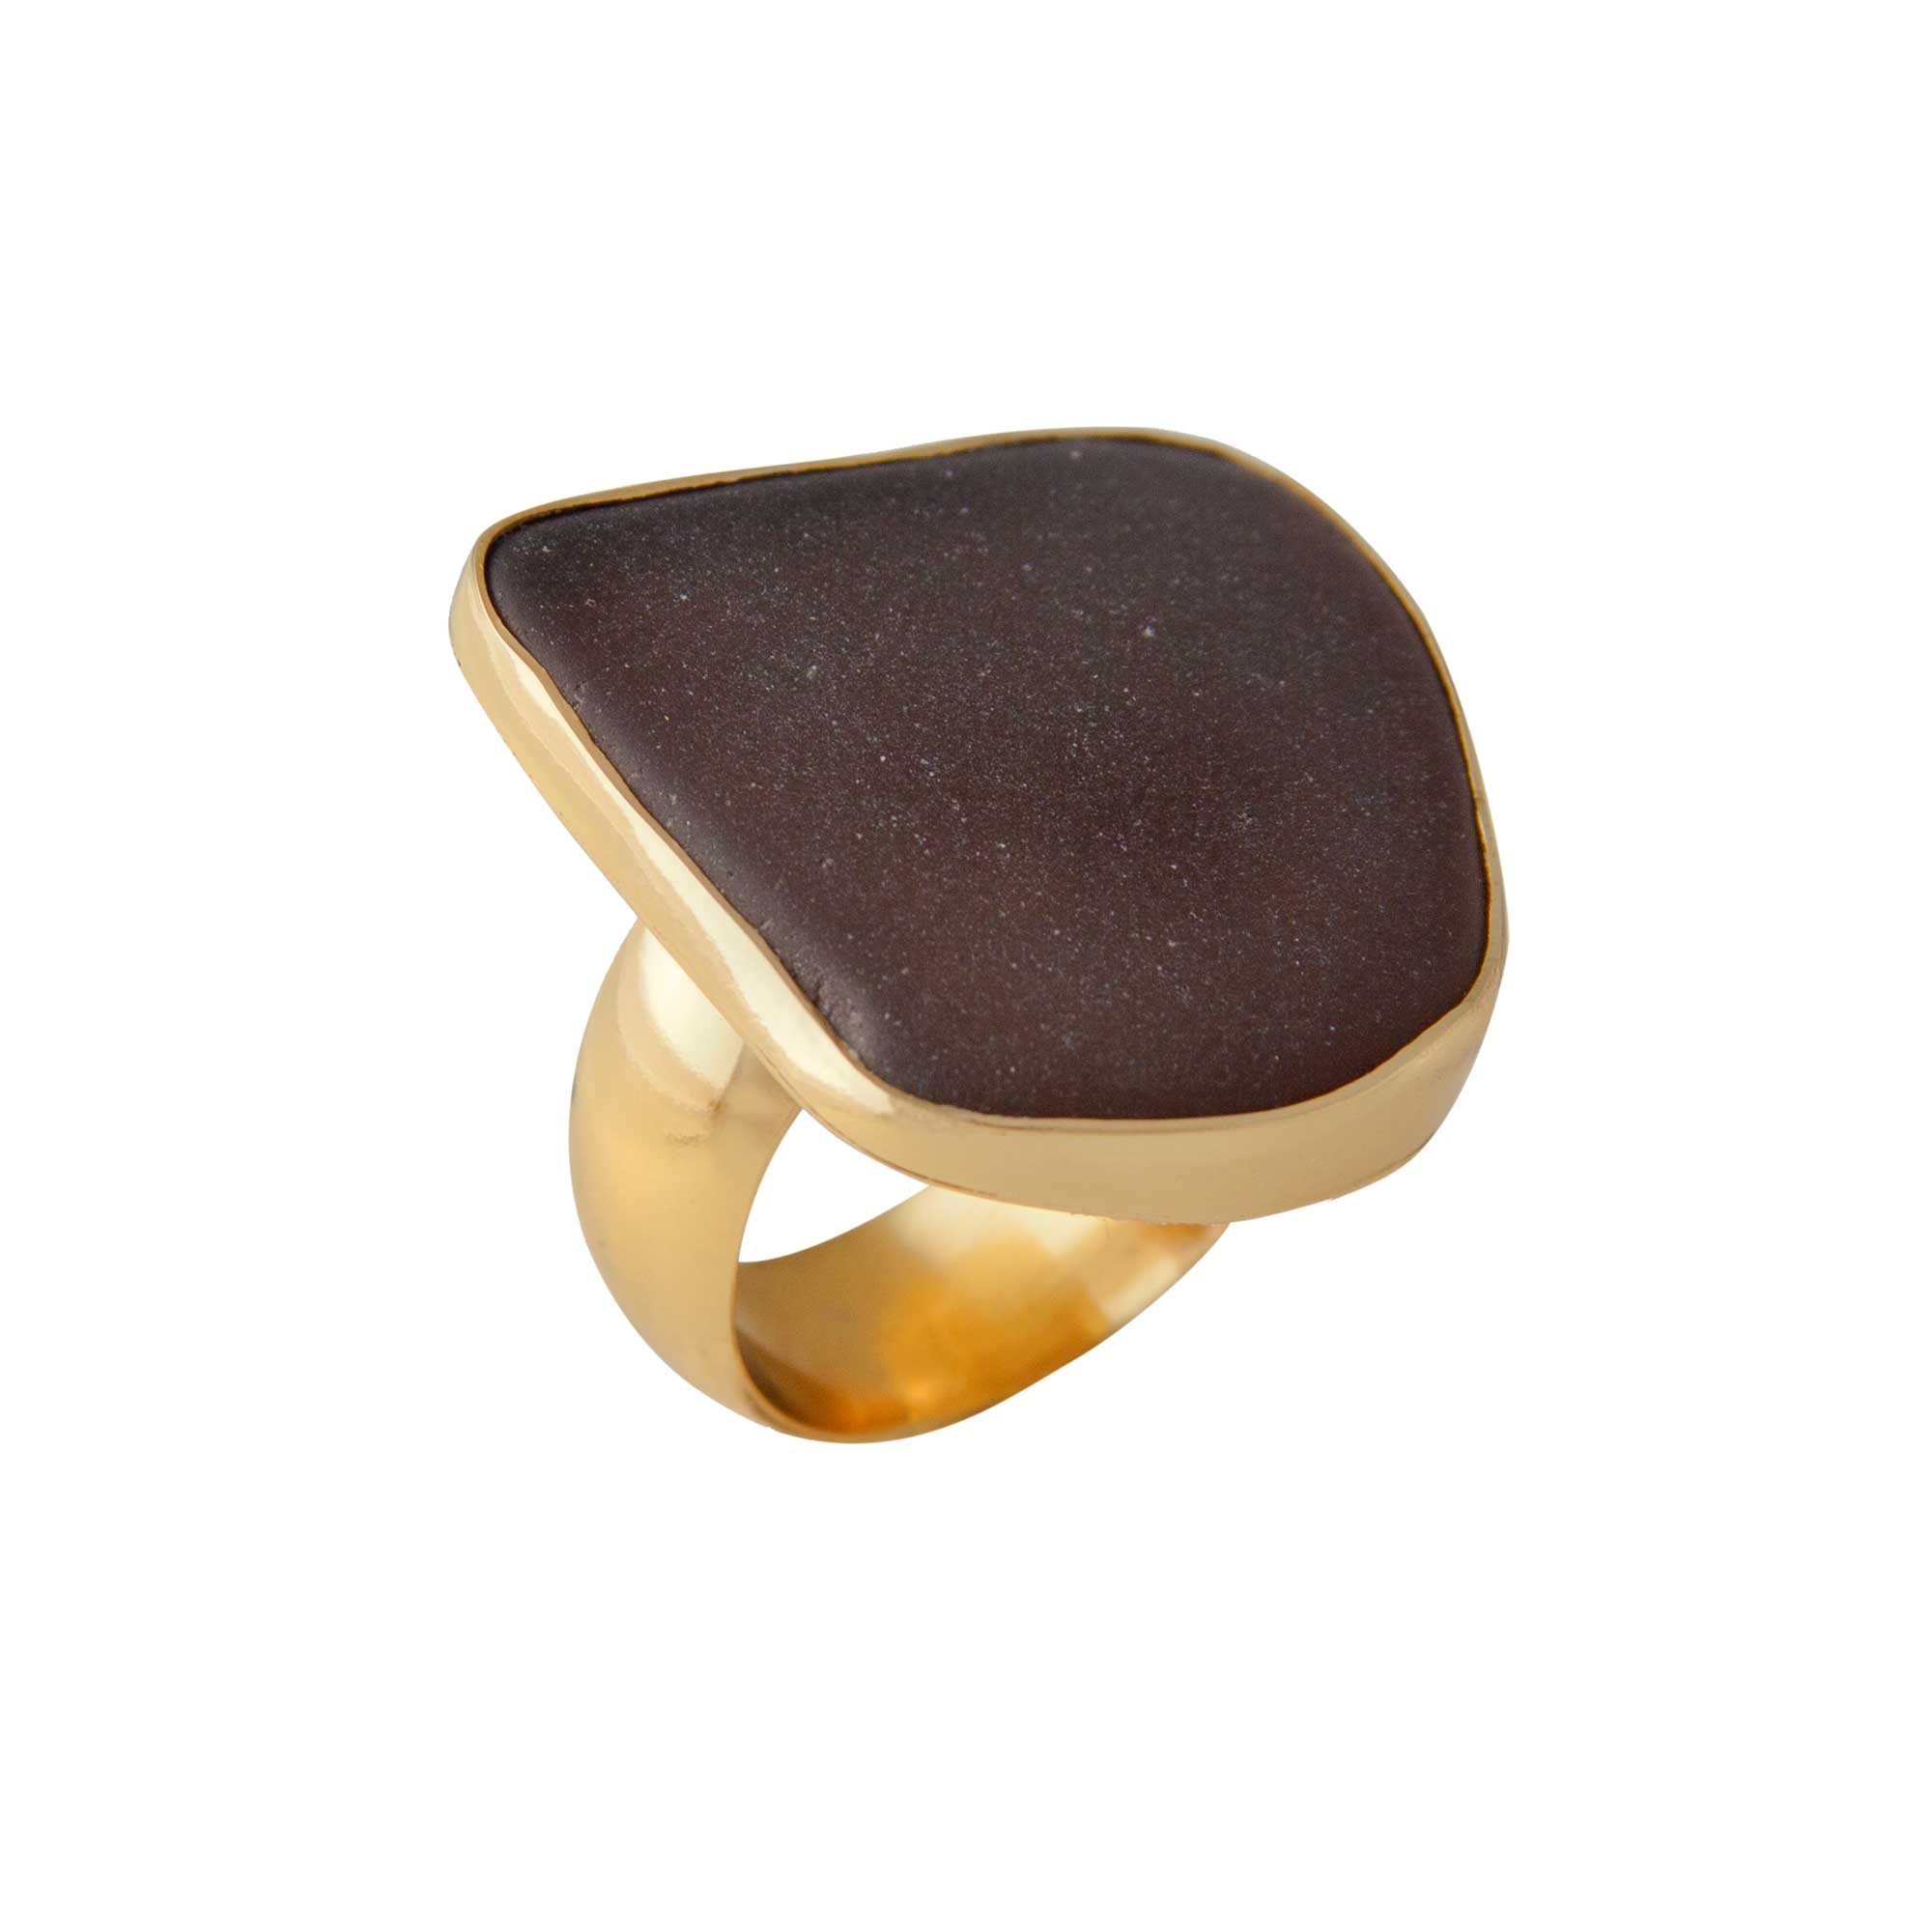 Alchemia Brown Recycled Glass Adjustable Ring | Charles Albert Jewelry